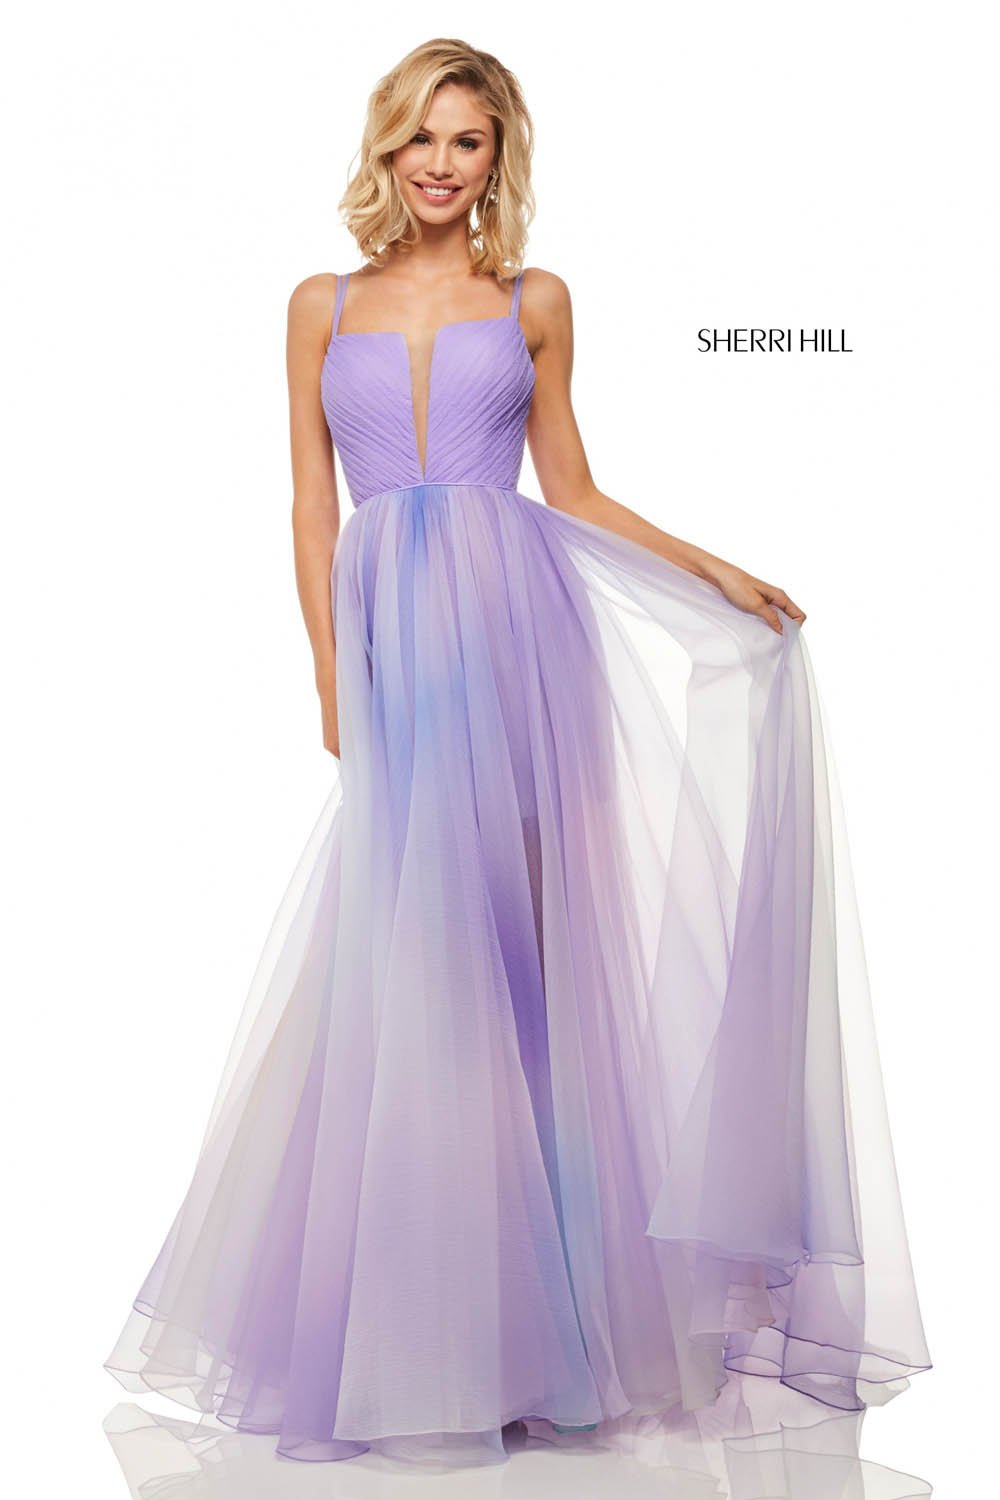 Sherri Hill 52853 dress images in these colors: Lilac, Light Blue, Pink Green.